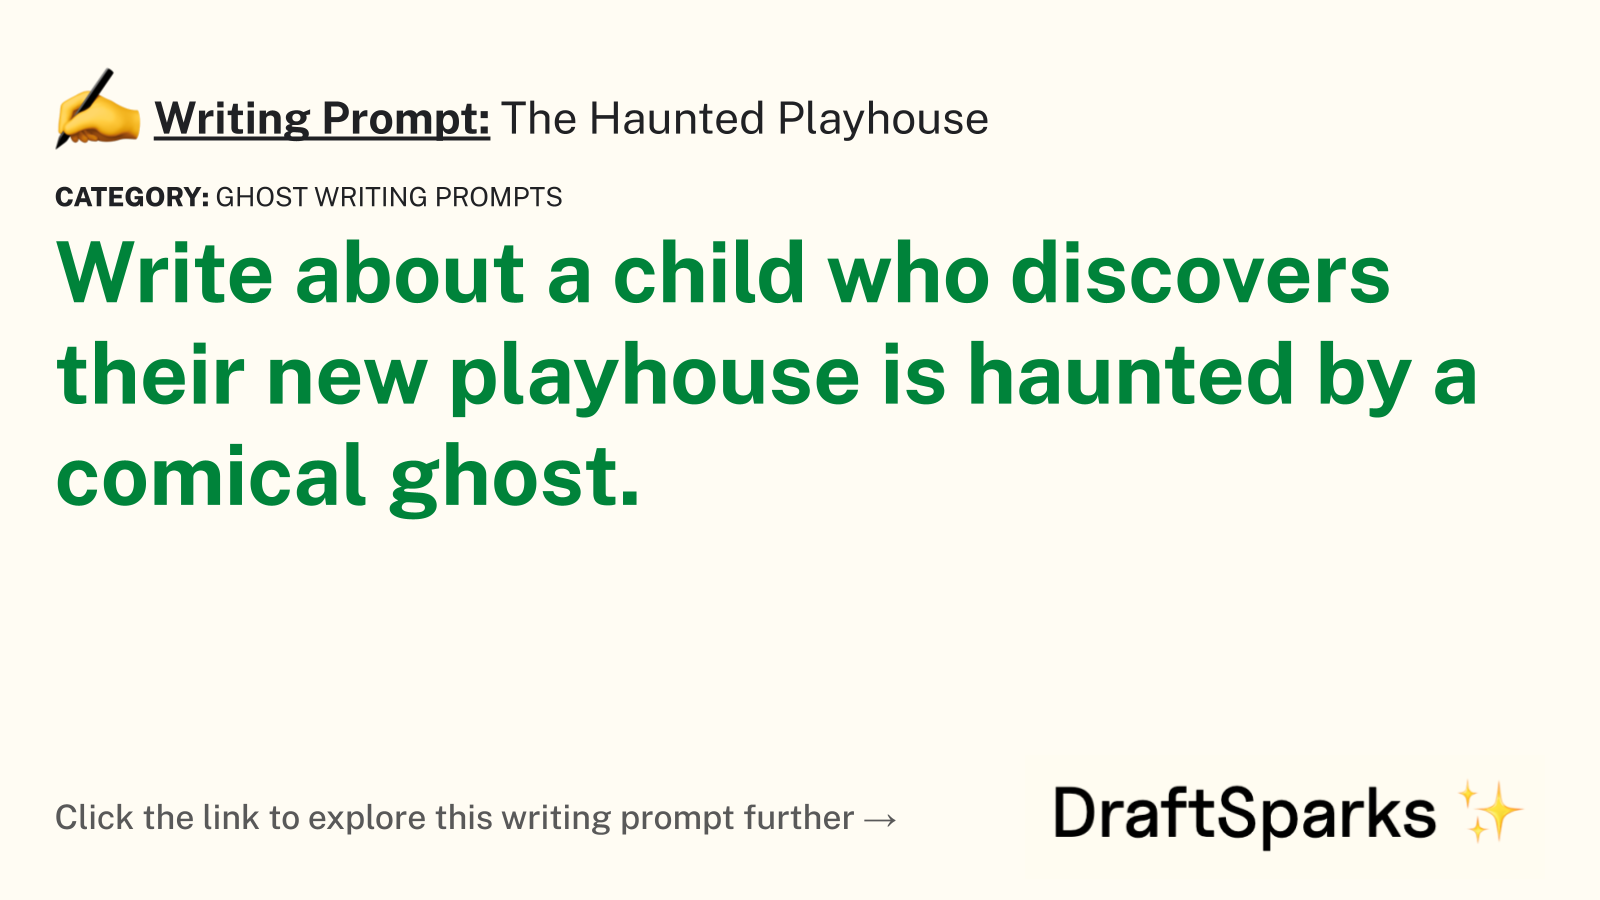 The Haunted Playhouse